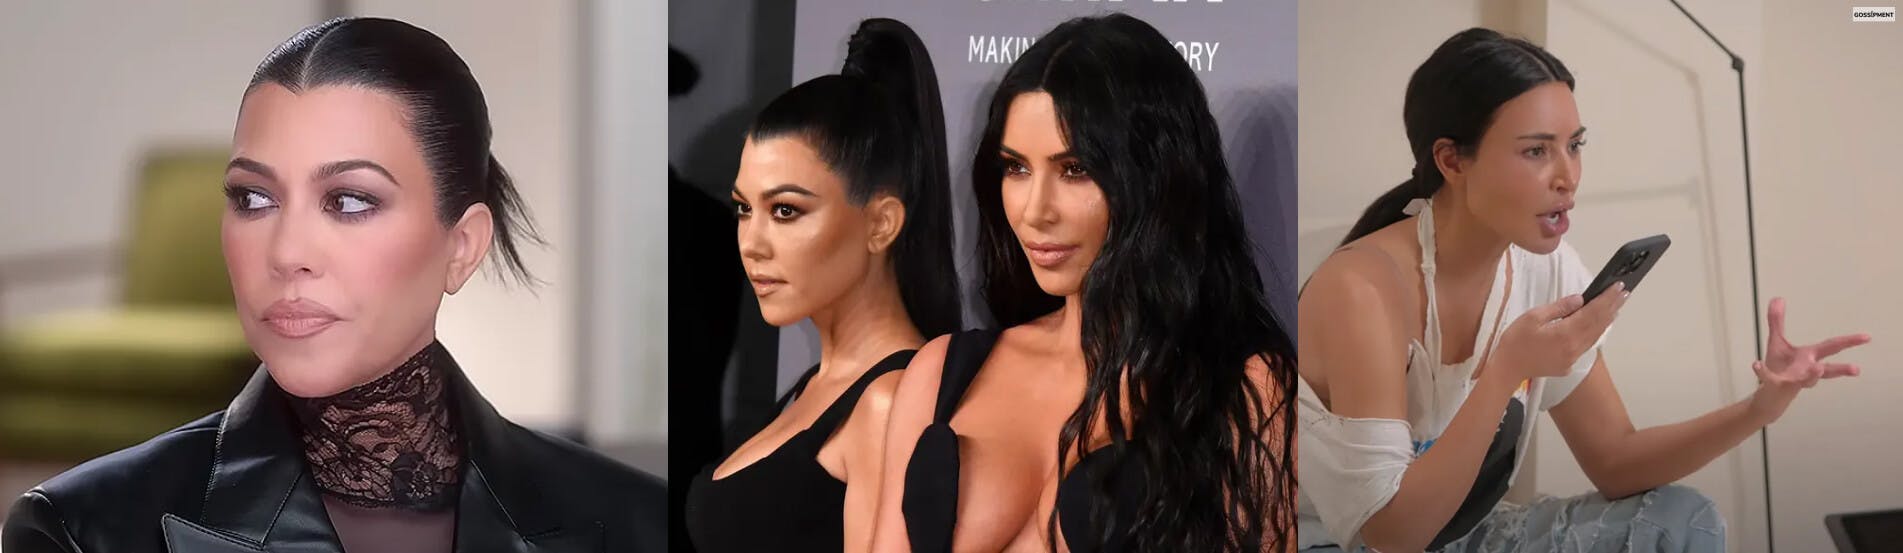 Cover Image for “You Are A Narcissist”- Kourtney Kardashian Blasted Kim Kardashian In Between Their Feud